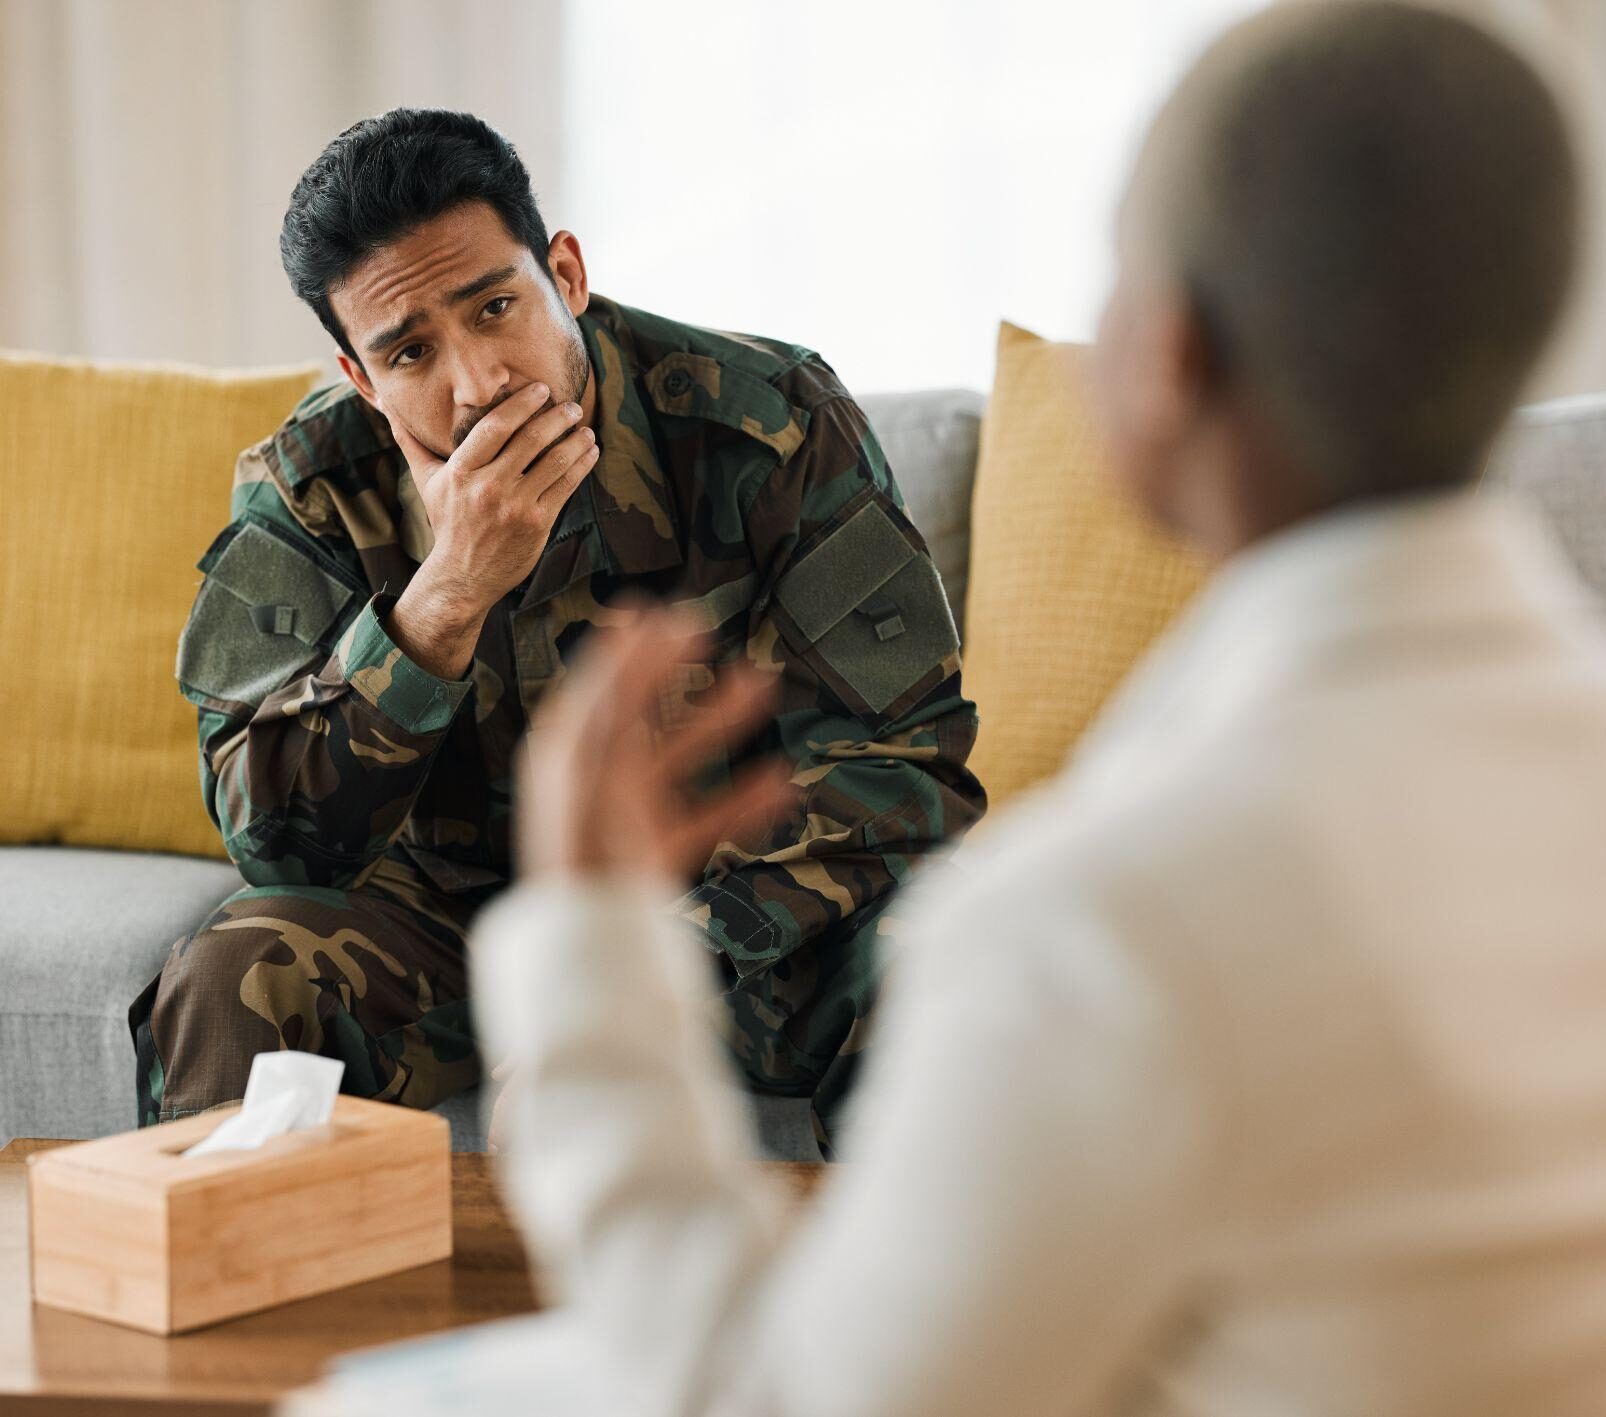 Listen therapist and military veteran with support in therapy